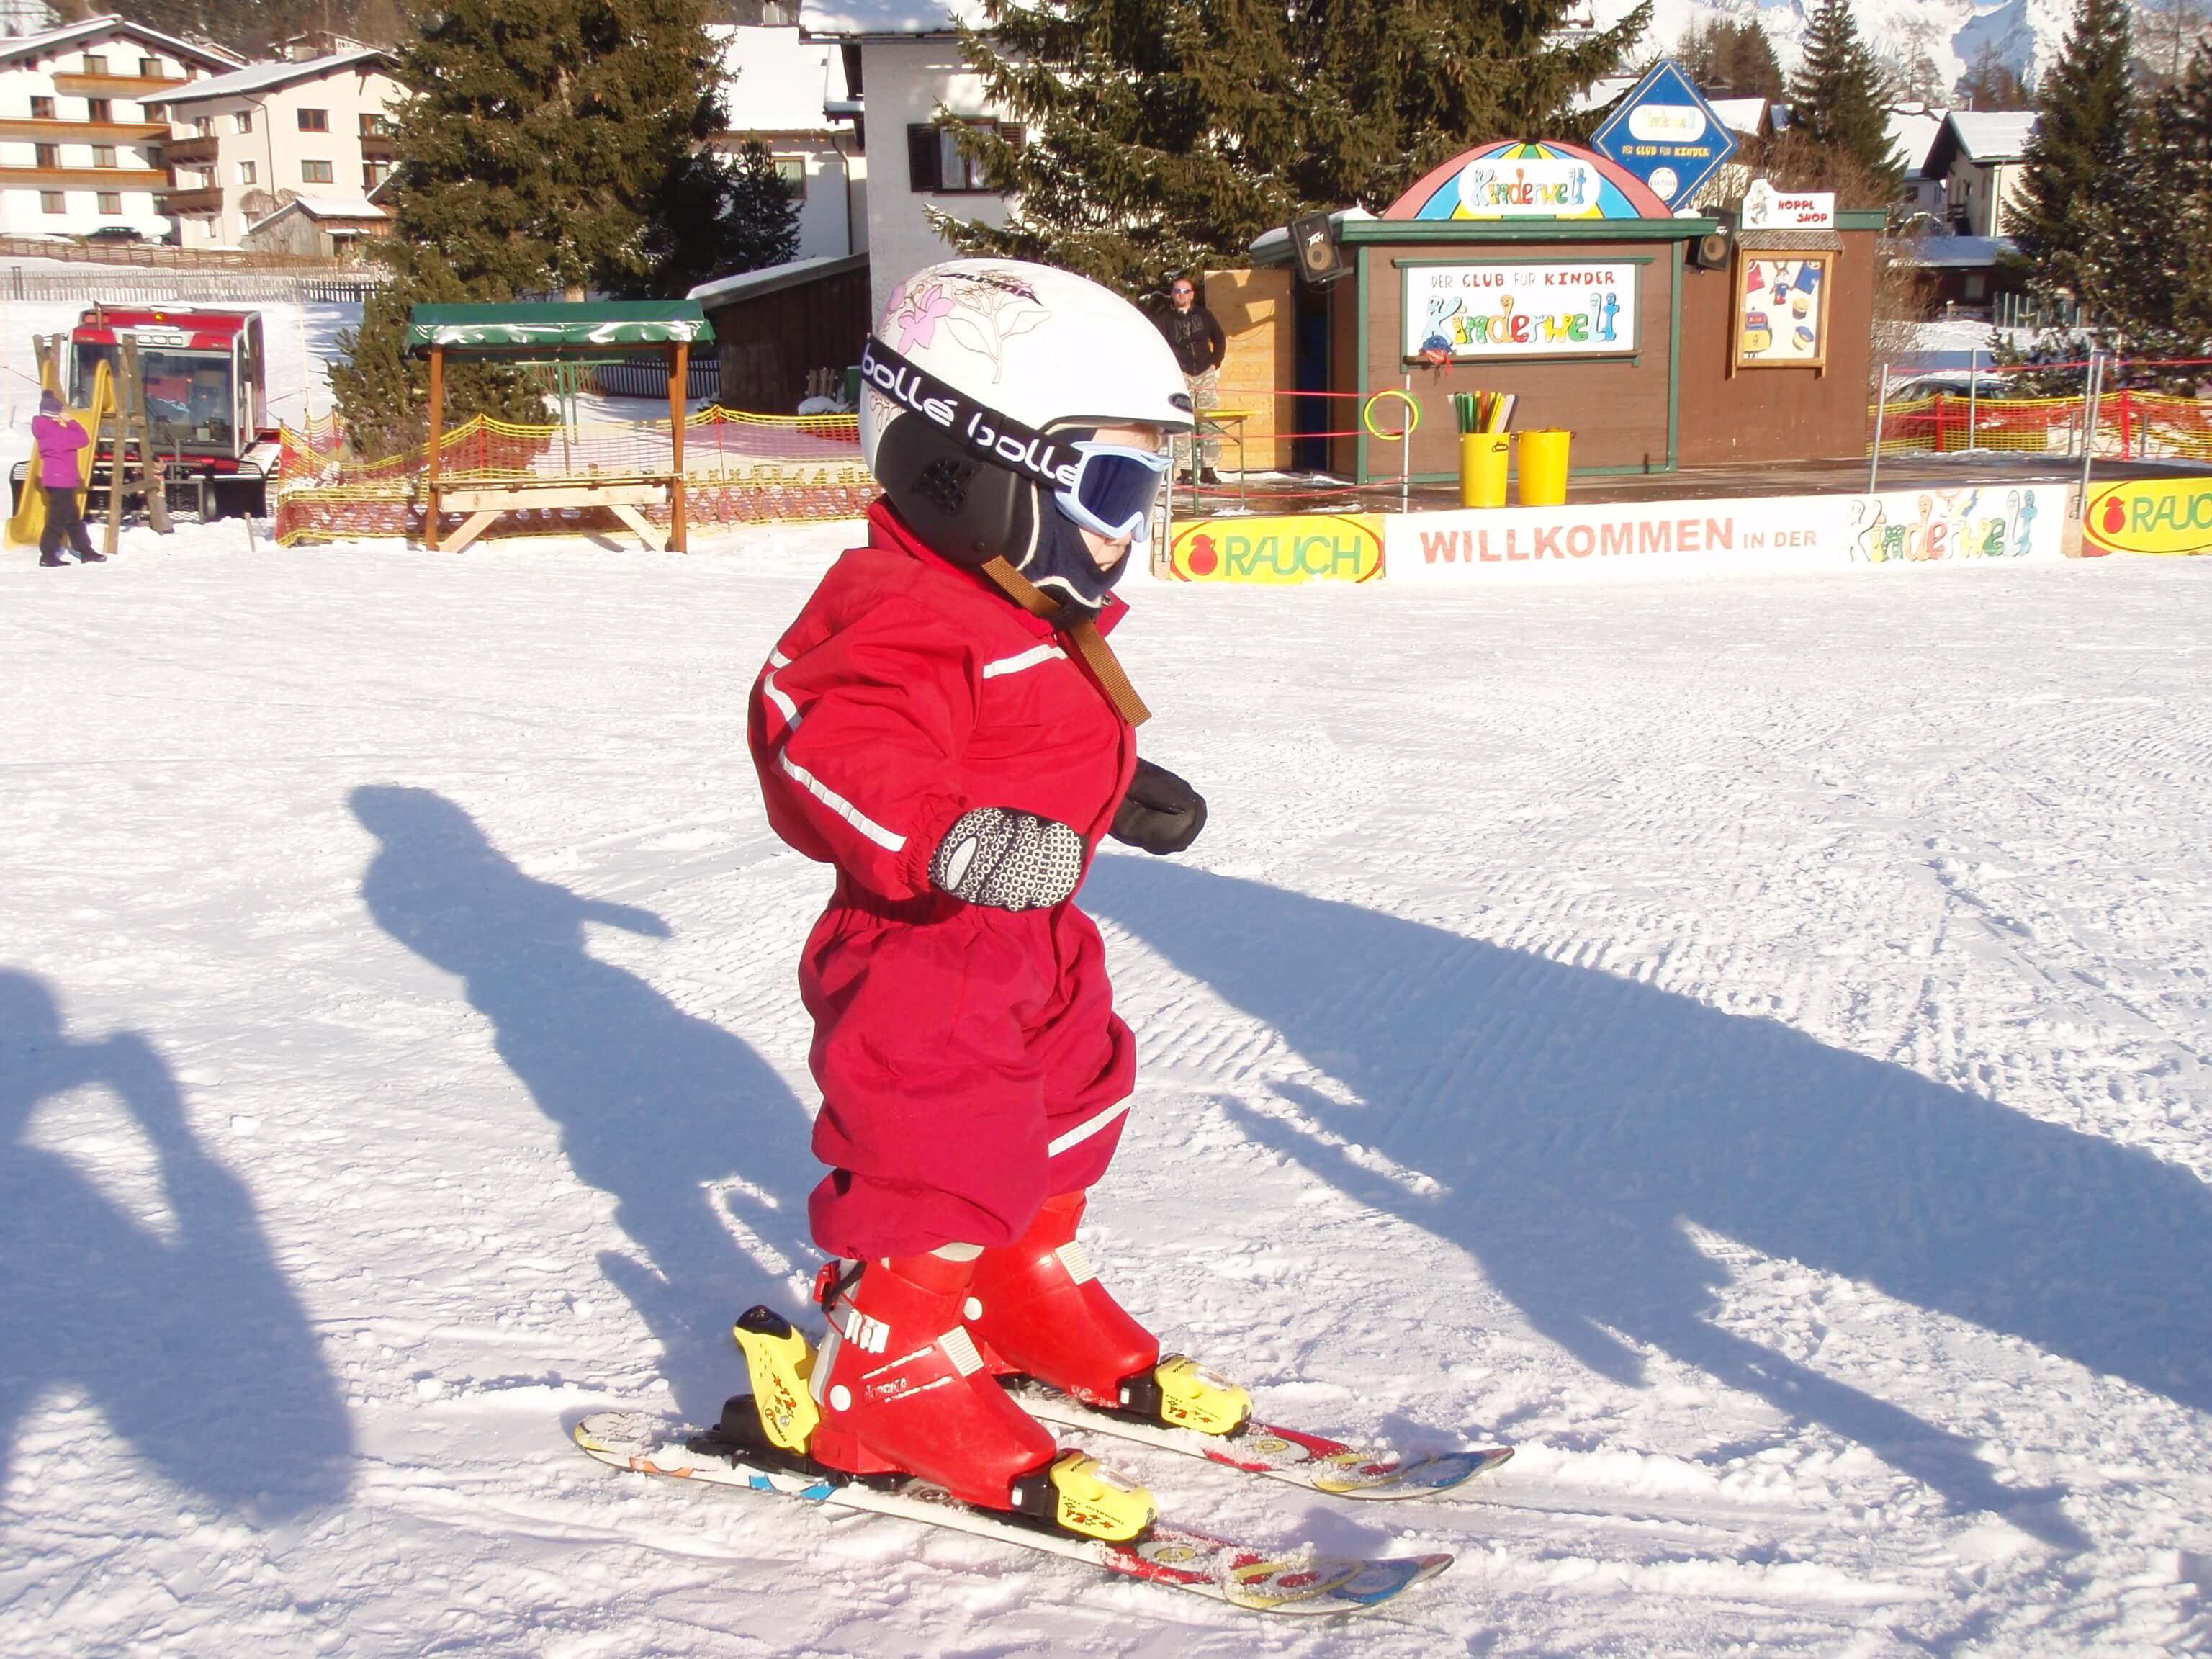 Skiing at 18 months